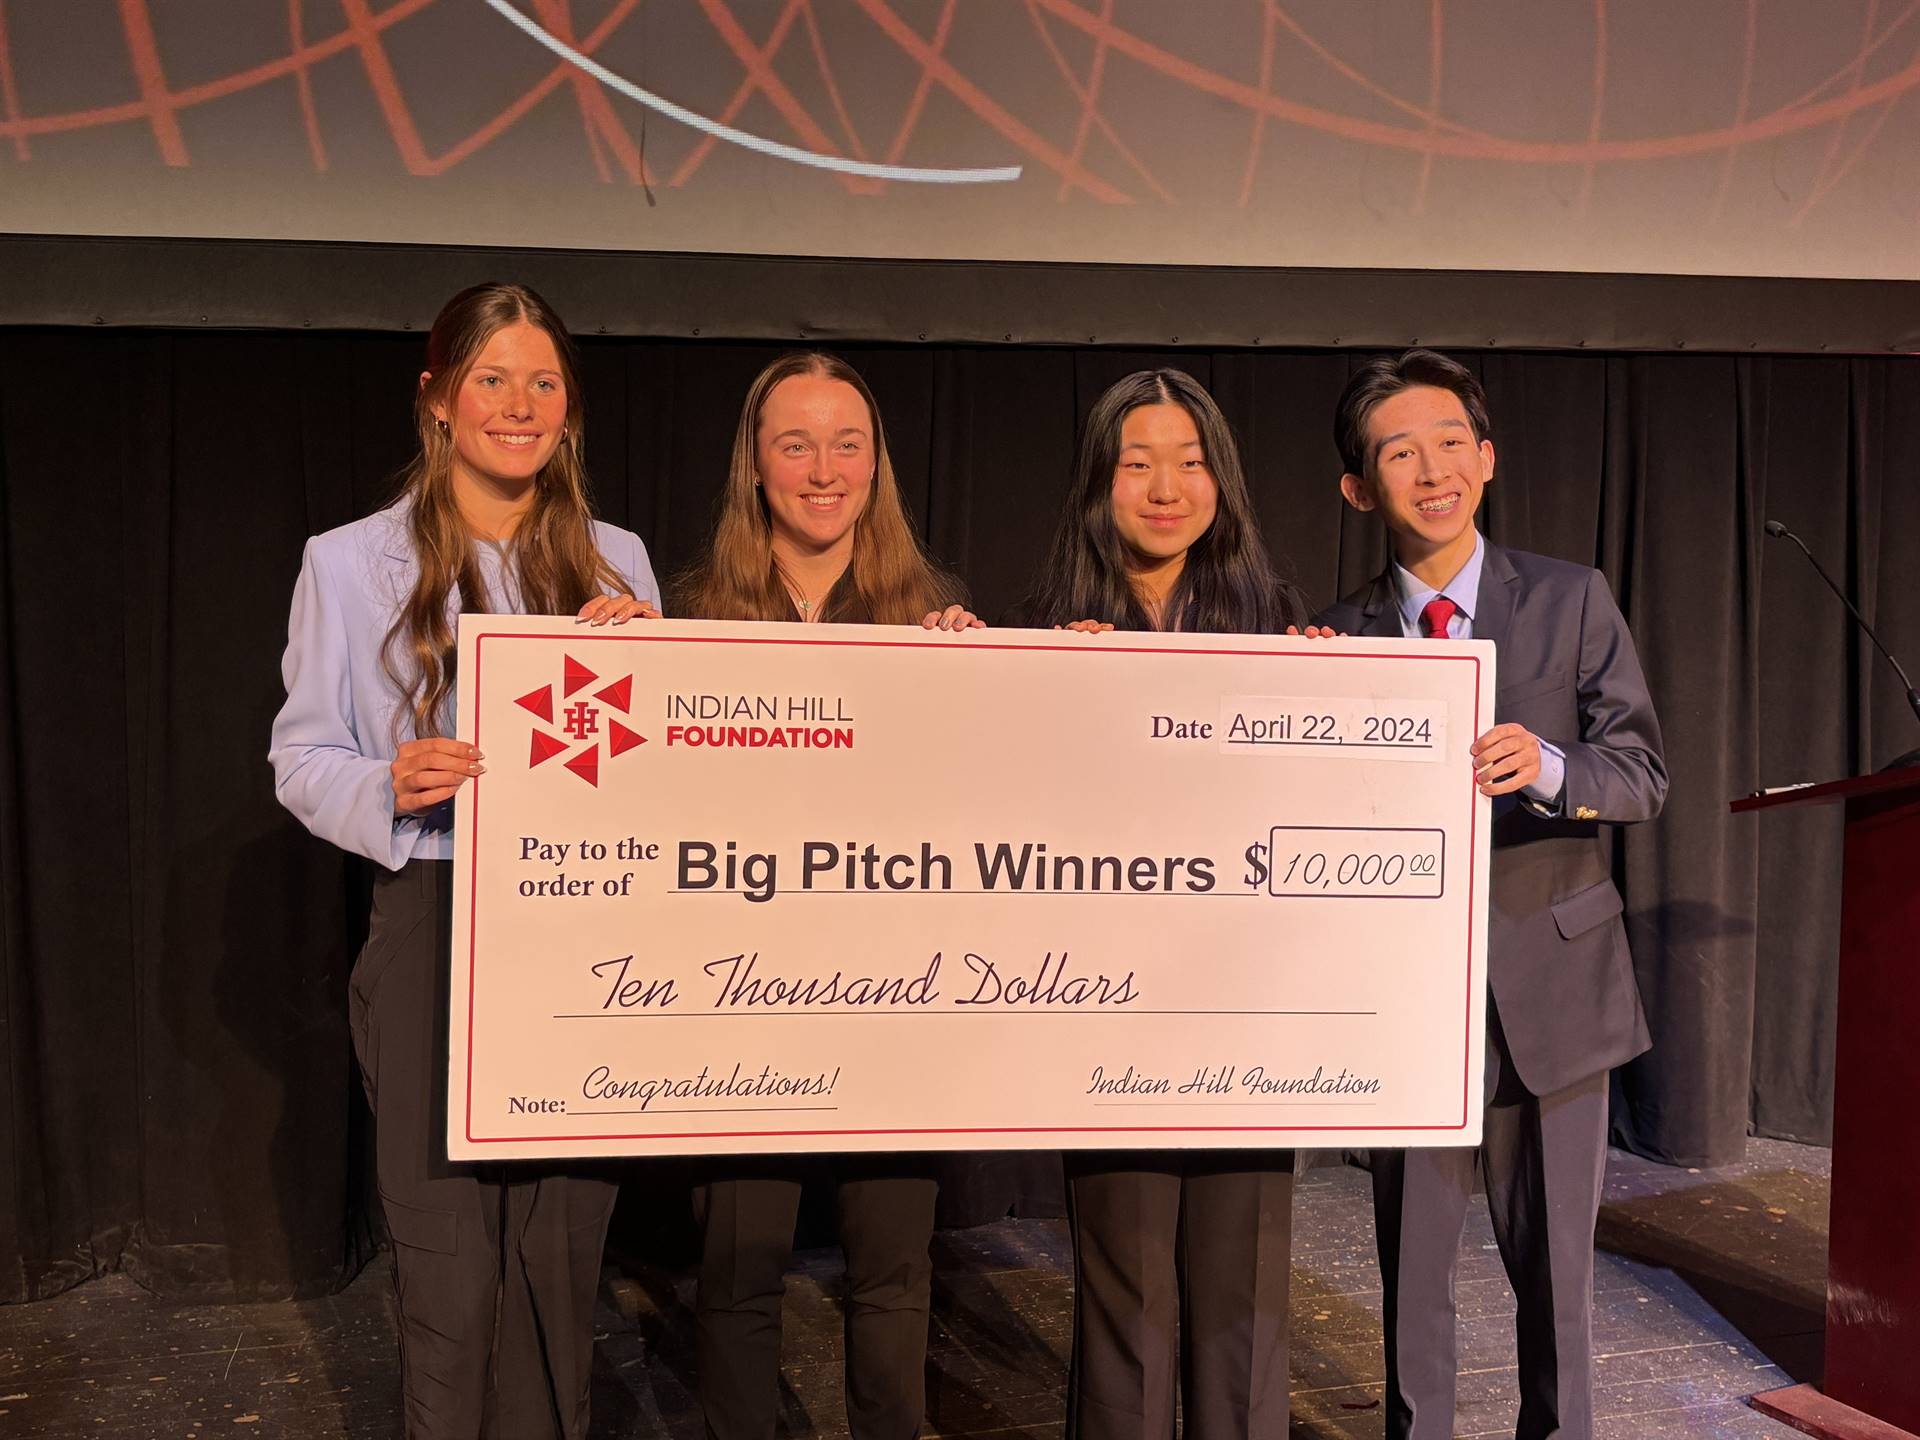 Big Pitch winners with check